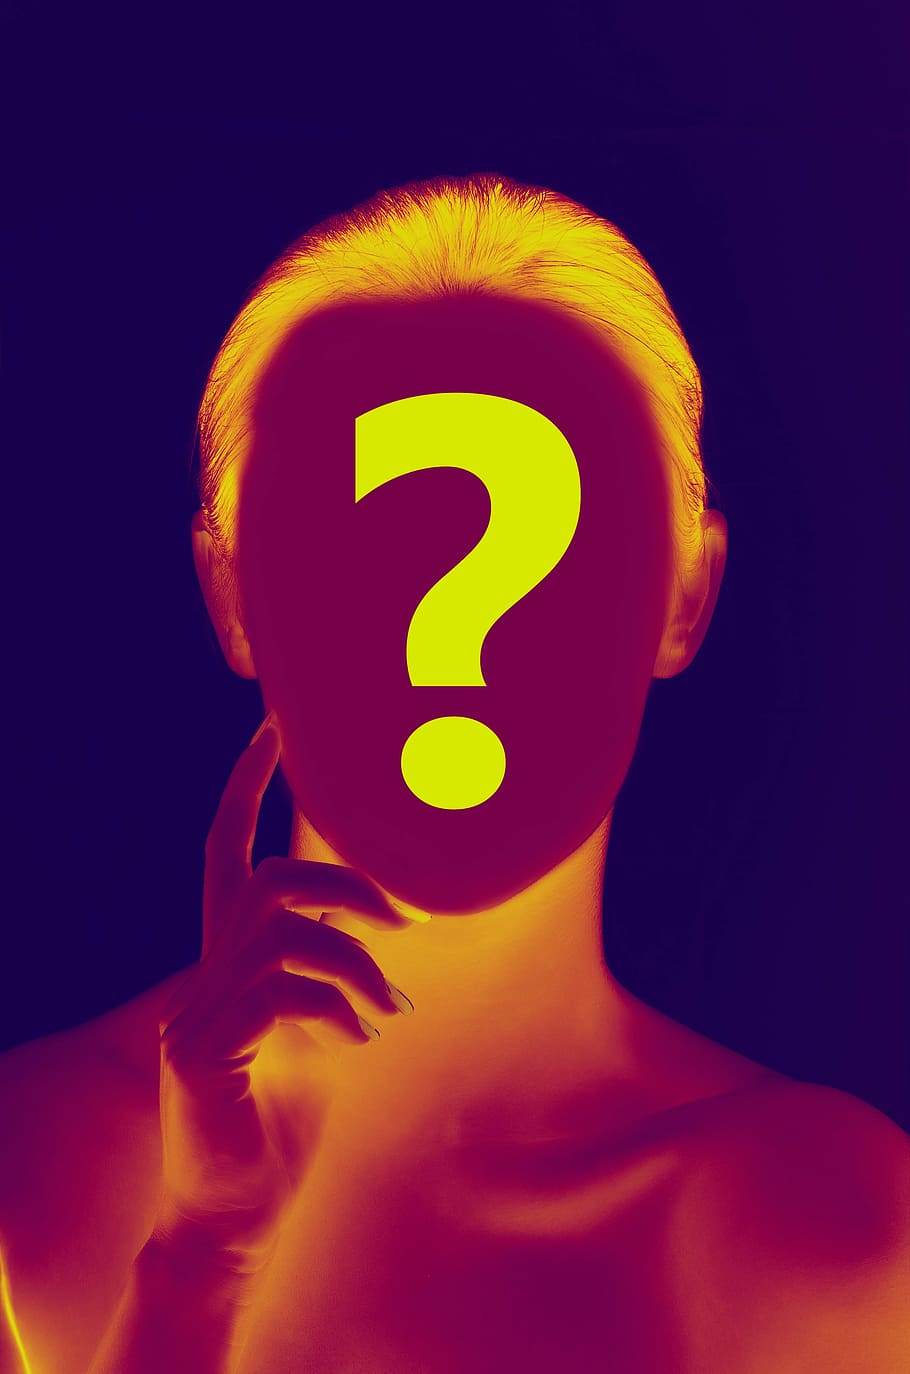 question mark on person's face, woman, head, circle, identity